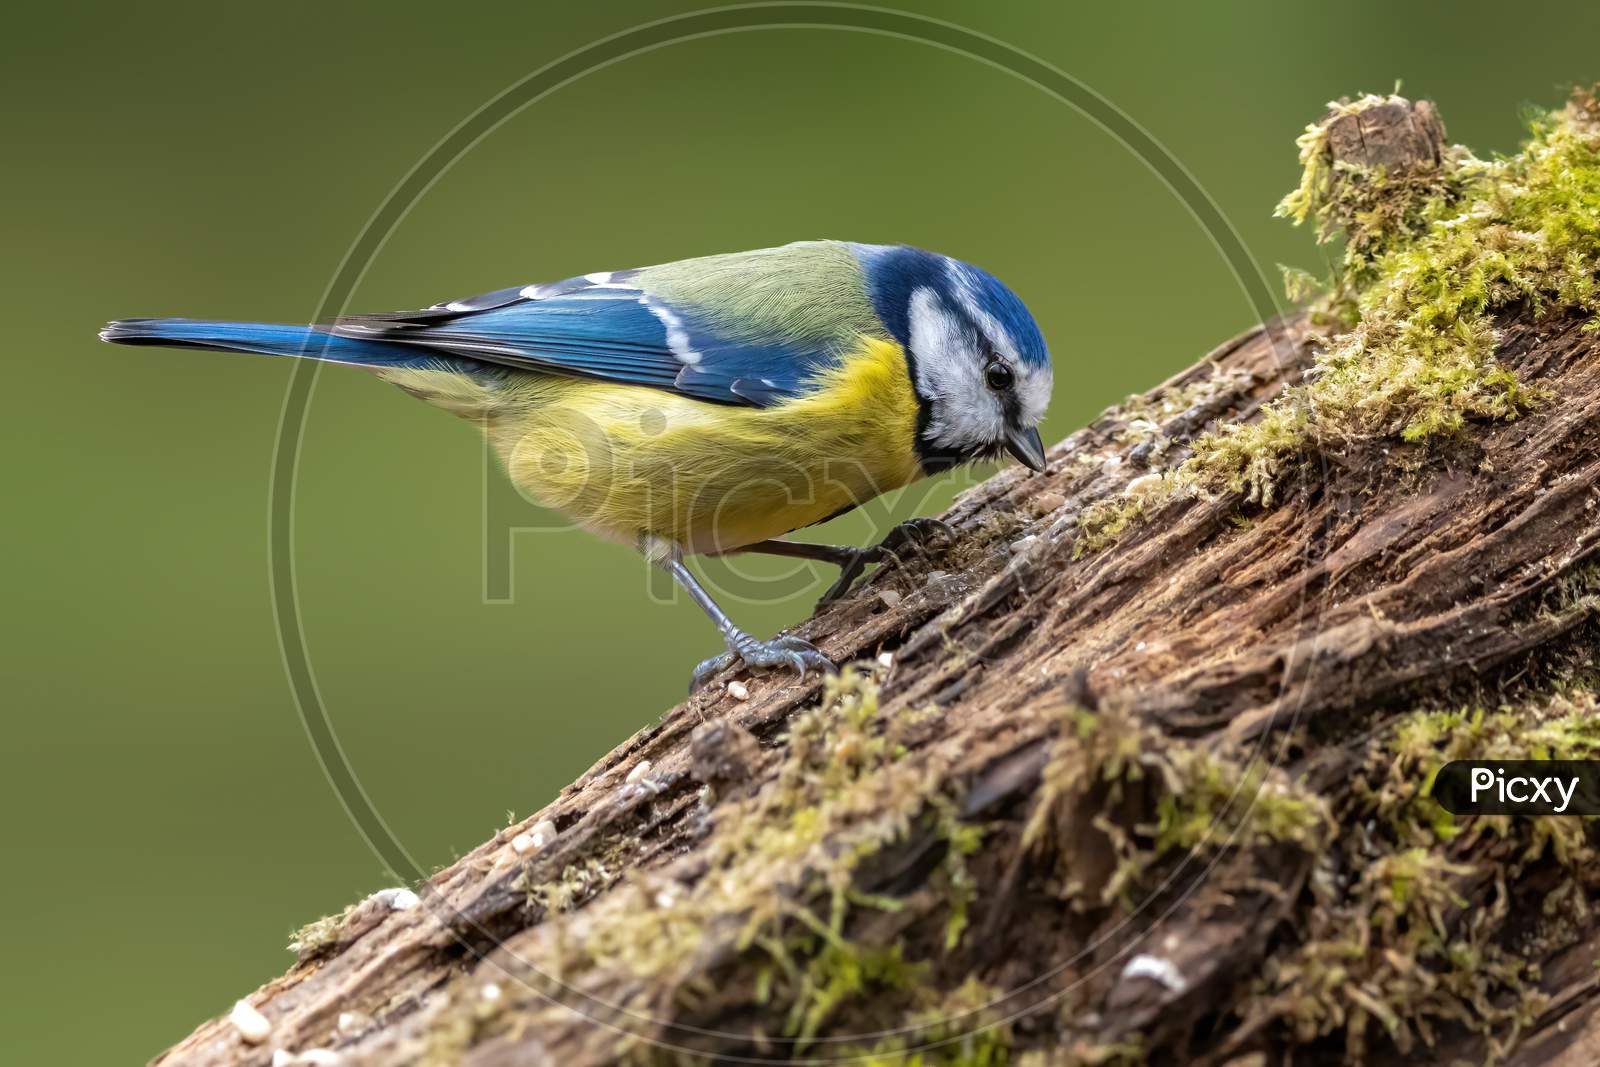 Blue tit at a feeding place at the Mönchbruch pond in a natural reserve in Hesse Germany. Looking for food in winter time.